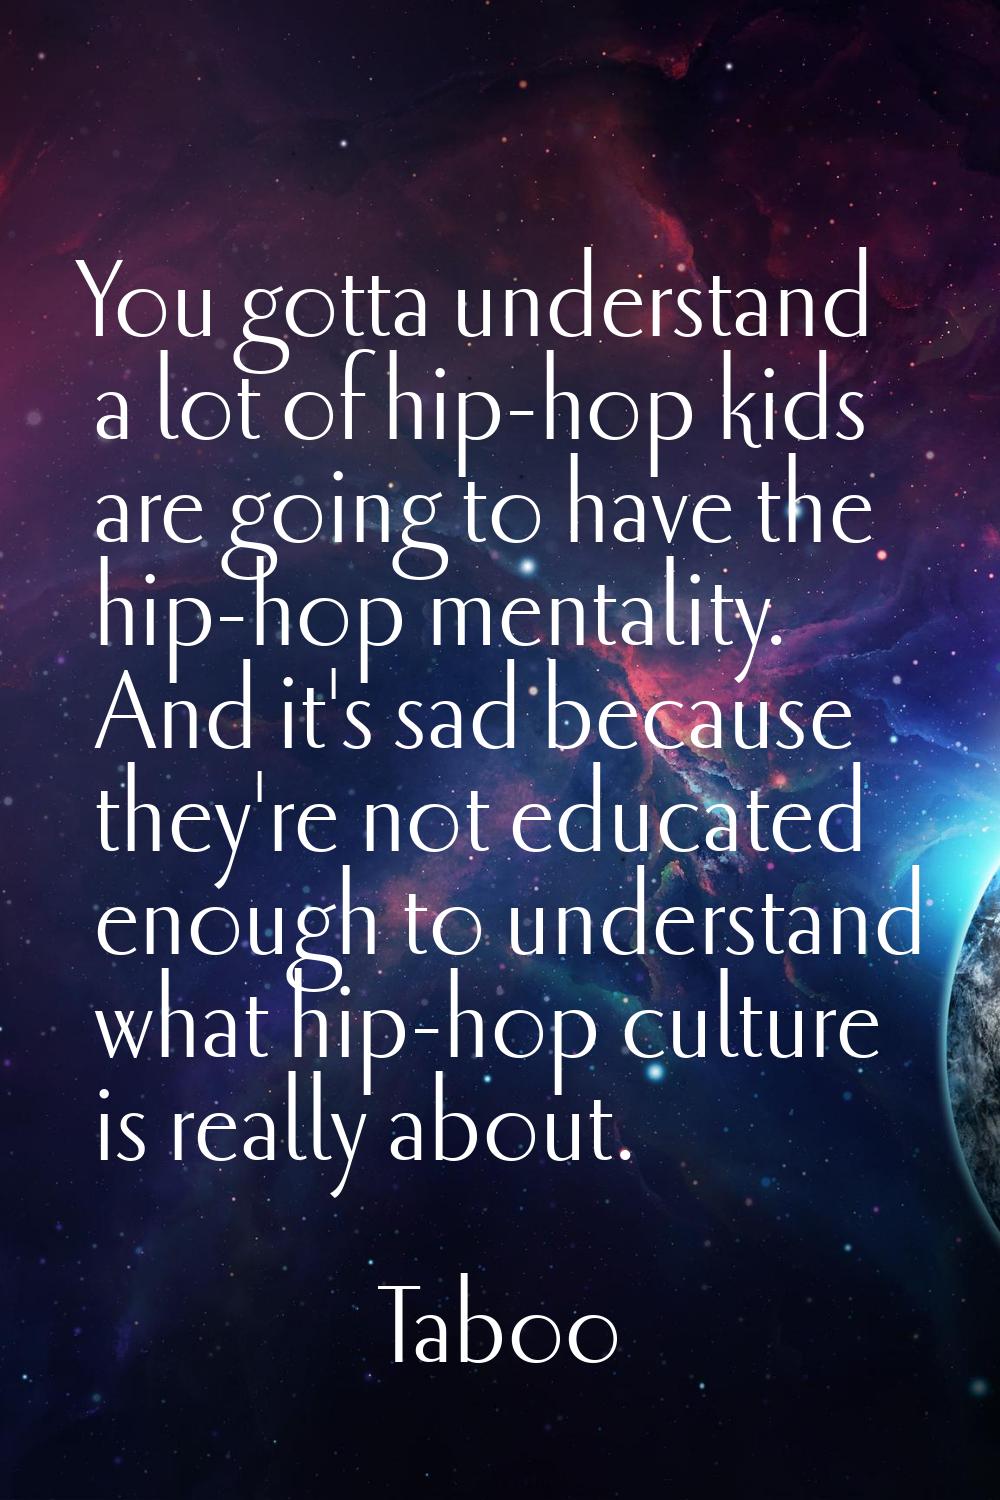 You gotta understand a lot of hip-hop kids are going to have the hip-hop mentality. And it's sad be